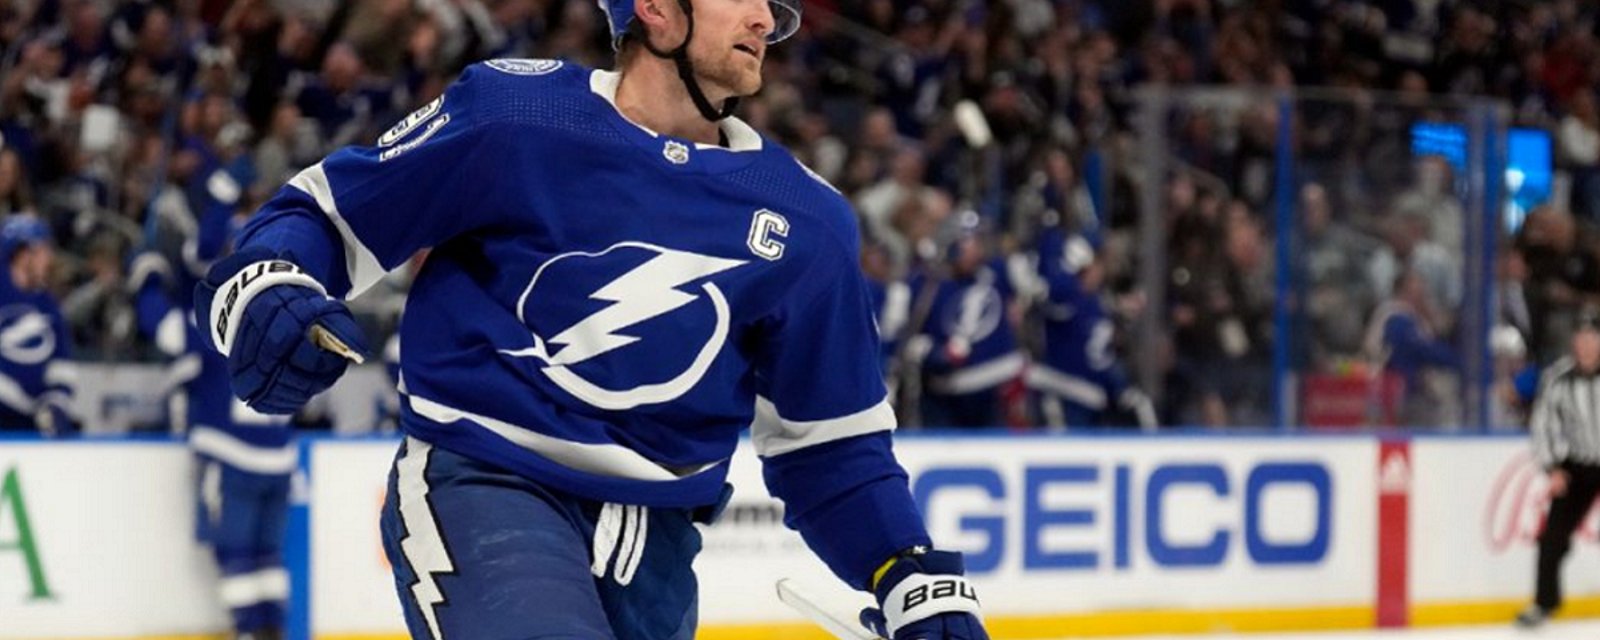 Stamkos explains why he left Tampa to sign in Nashville.